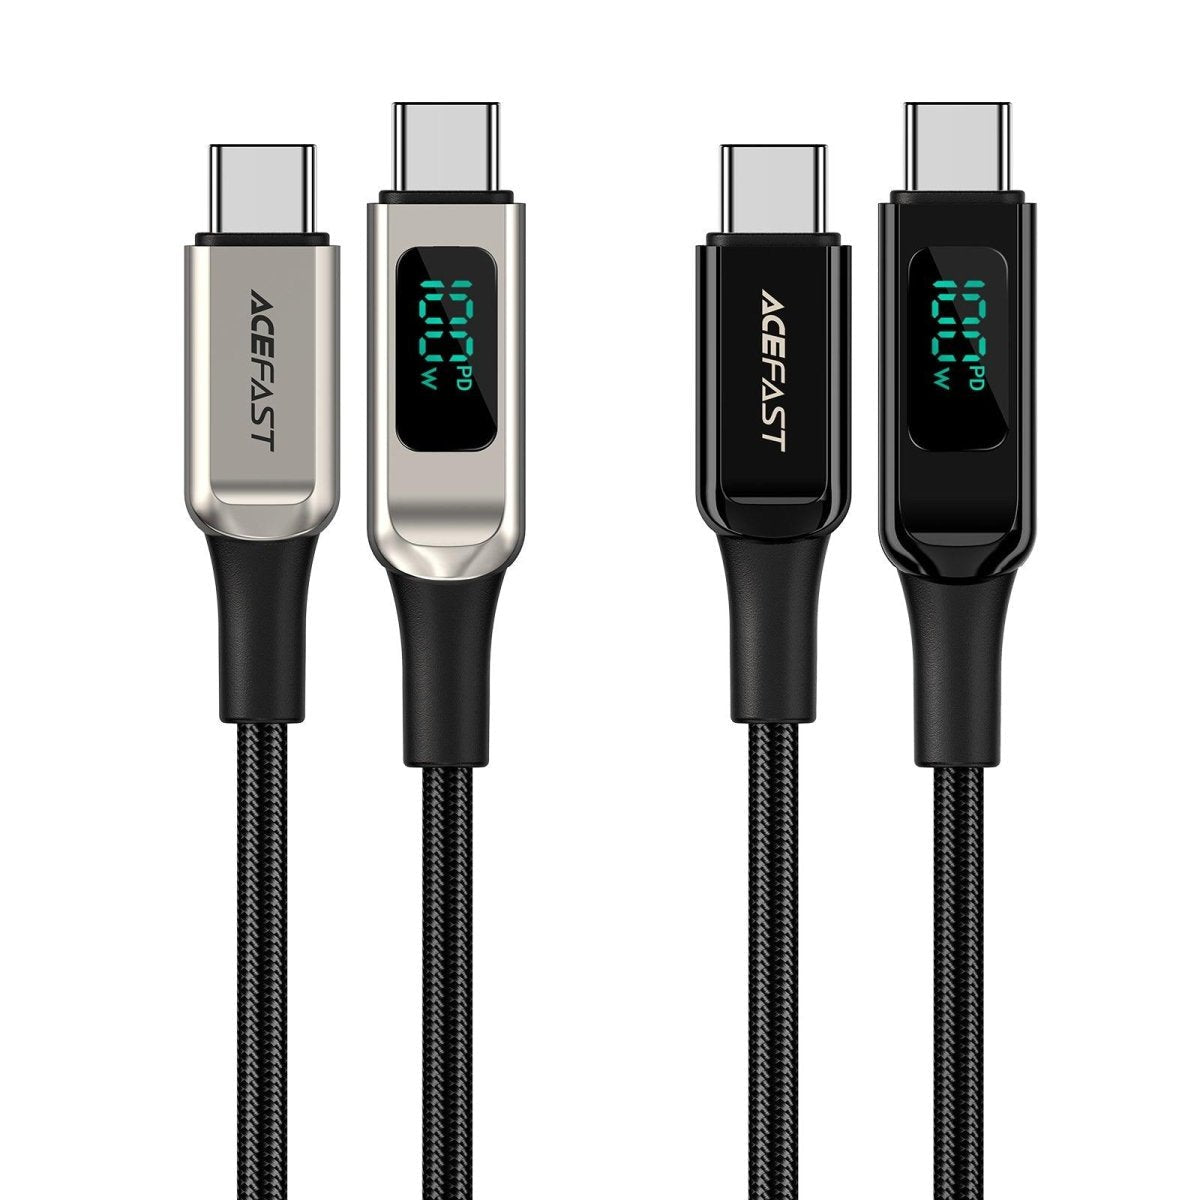 Usb C Cable 100w Display, Cable Usb Type C Display